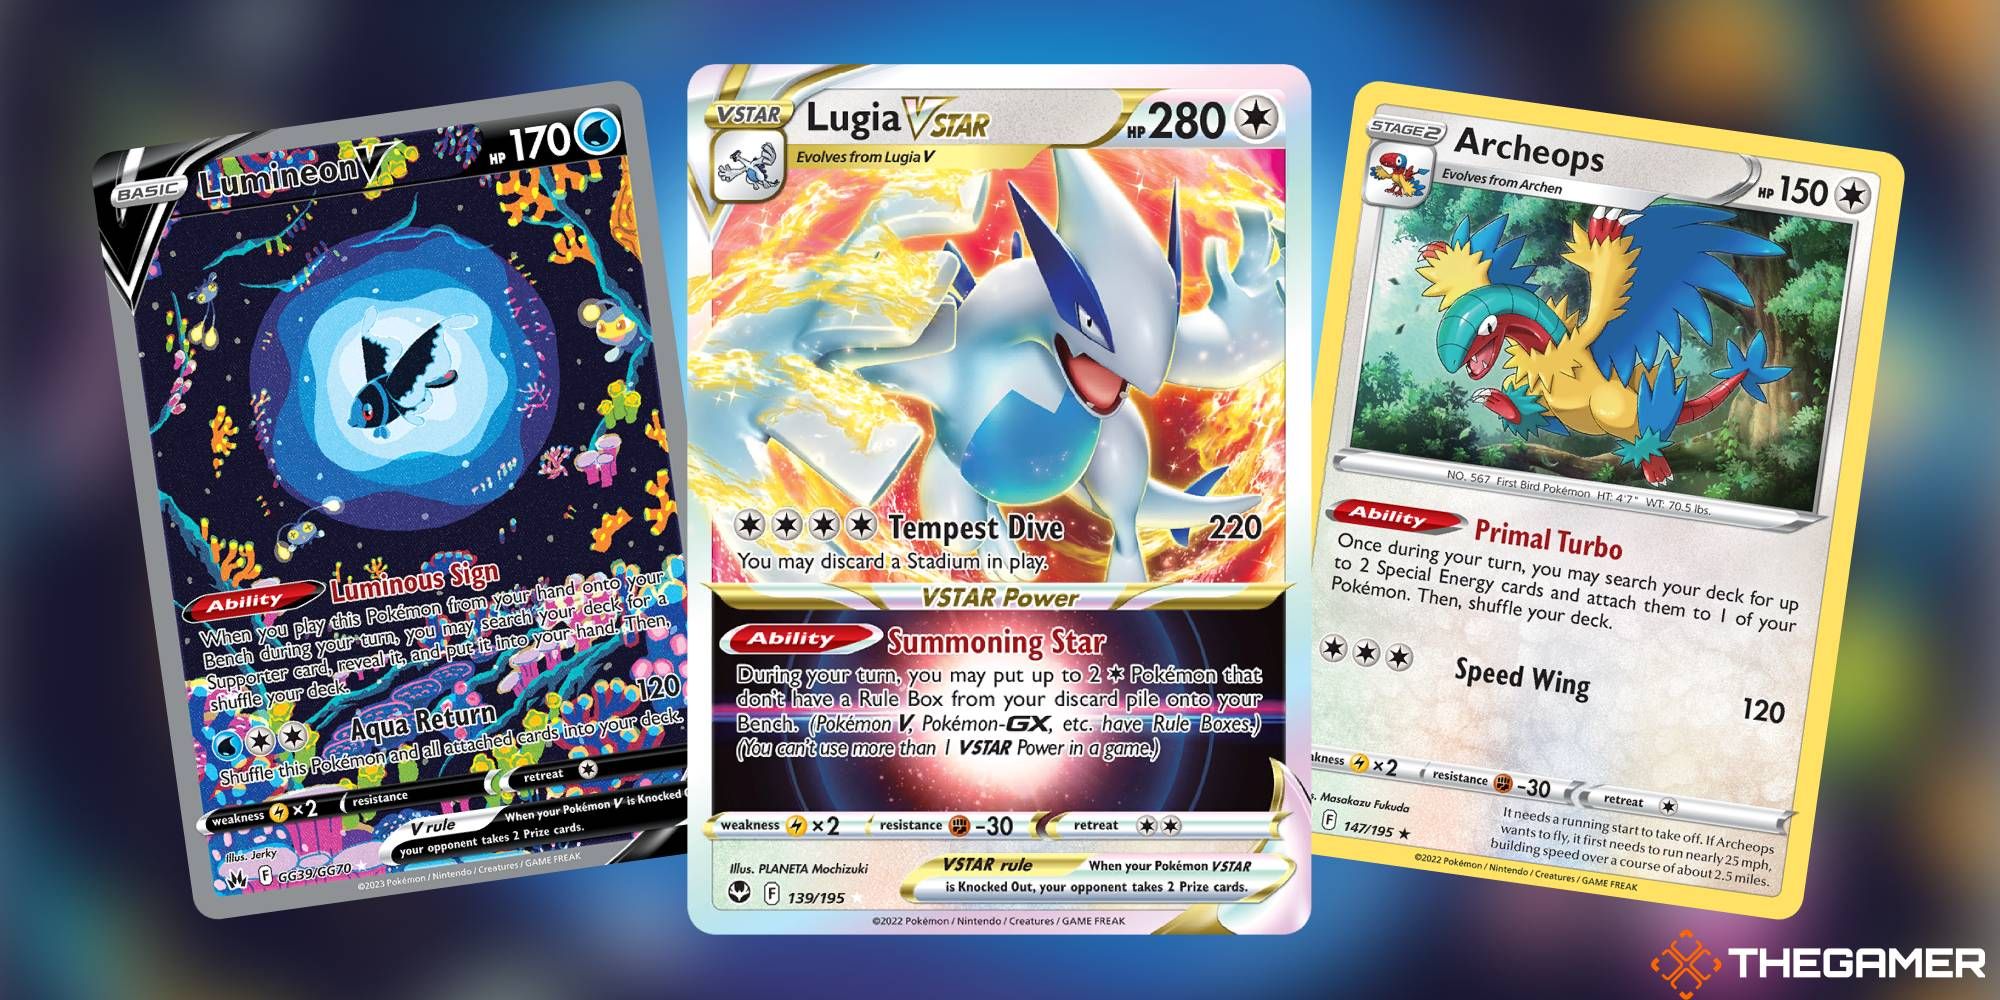 How To Build A Lugia VSTAR Deck In Pokemon TCG